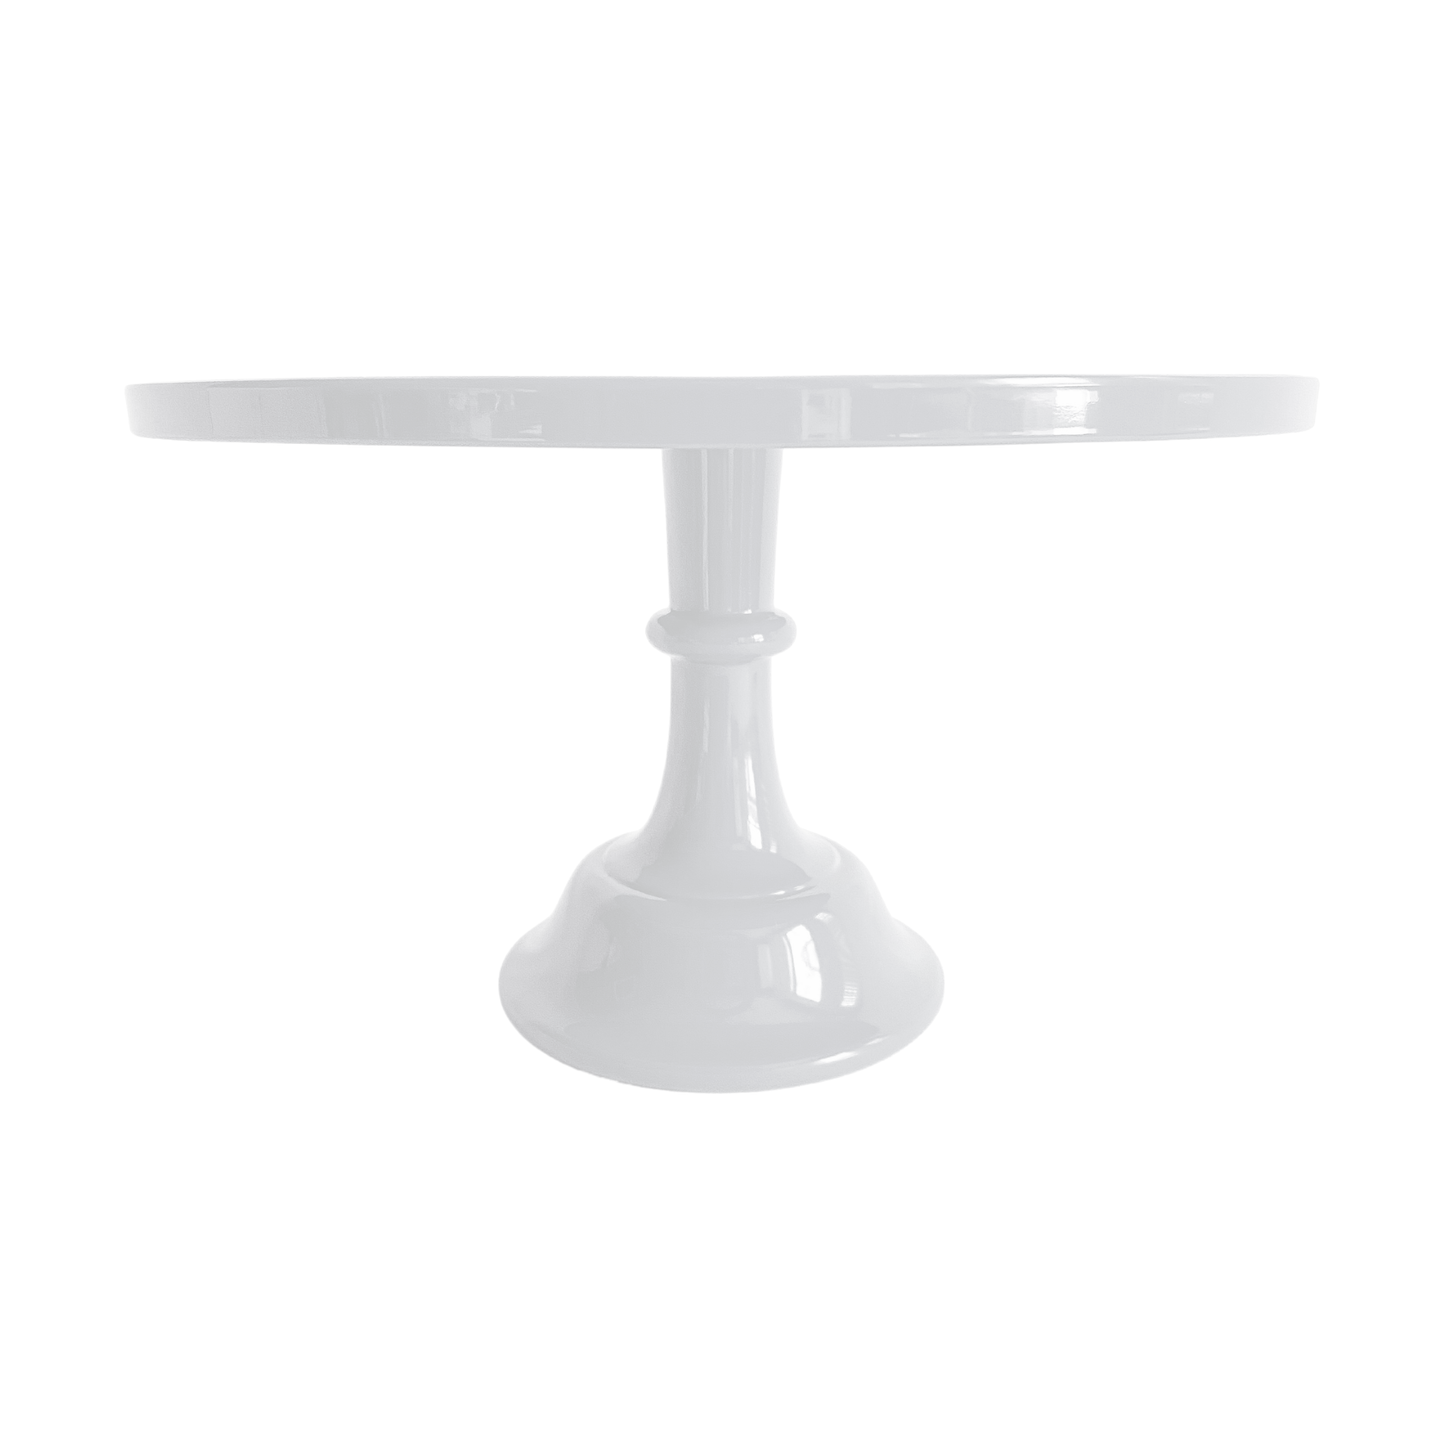 White Pedestal Cake Stand by Sprinkles & Confetti | Party Boxes & Party Supplies